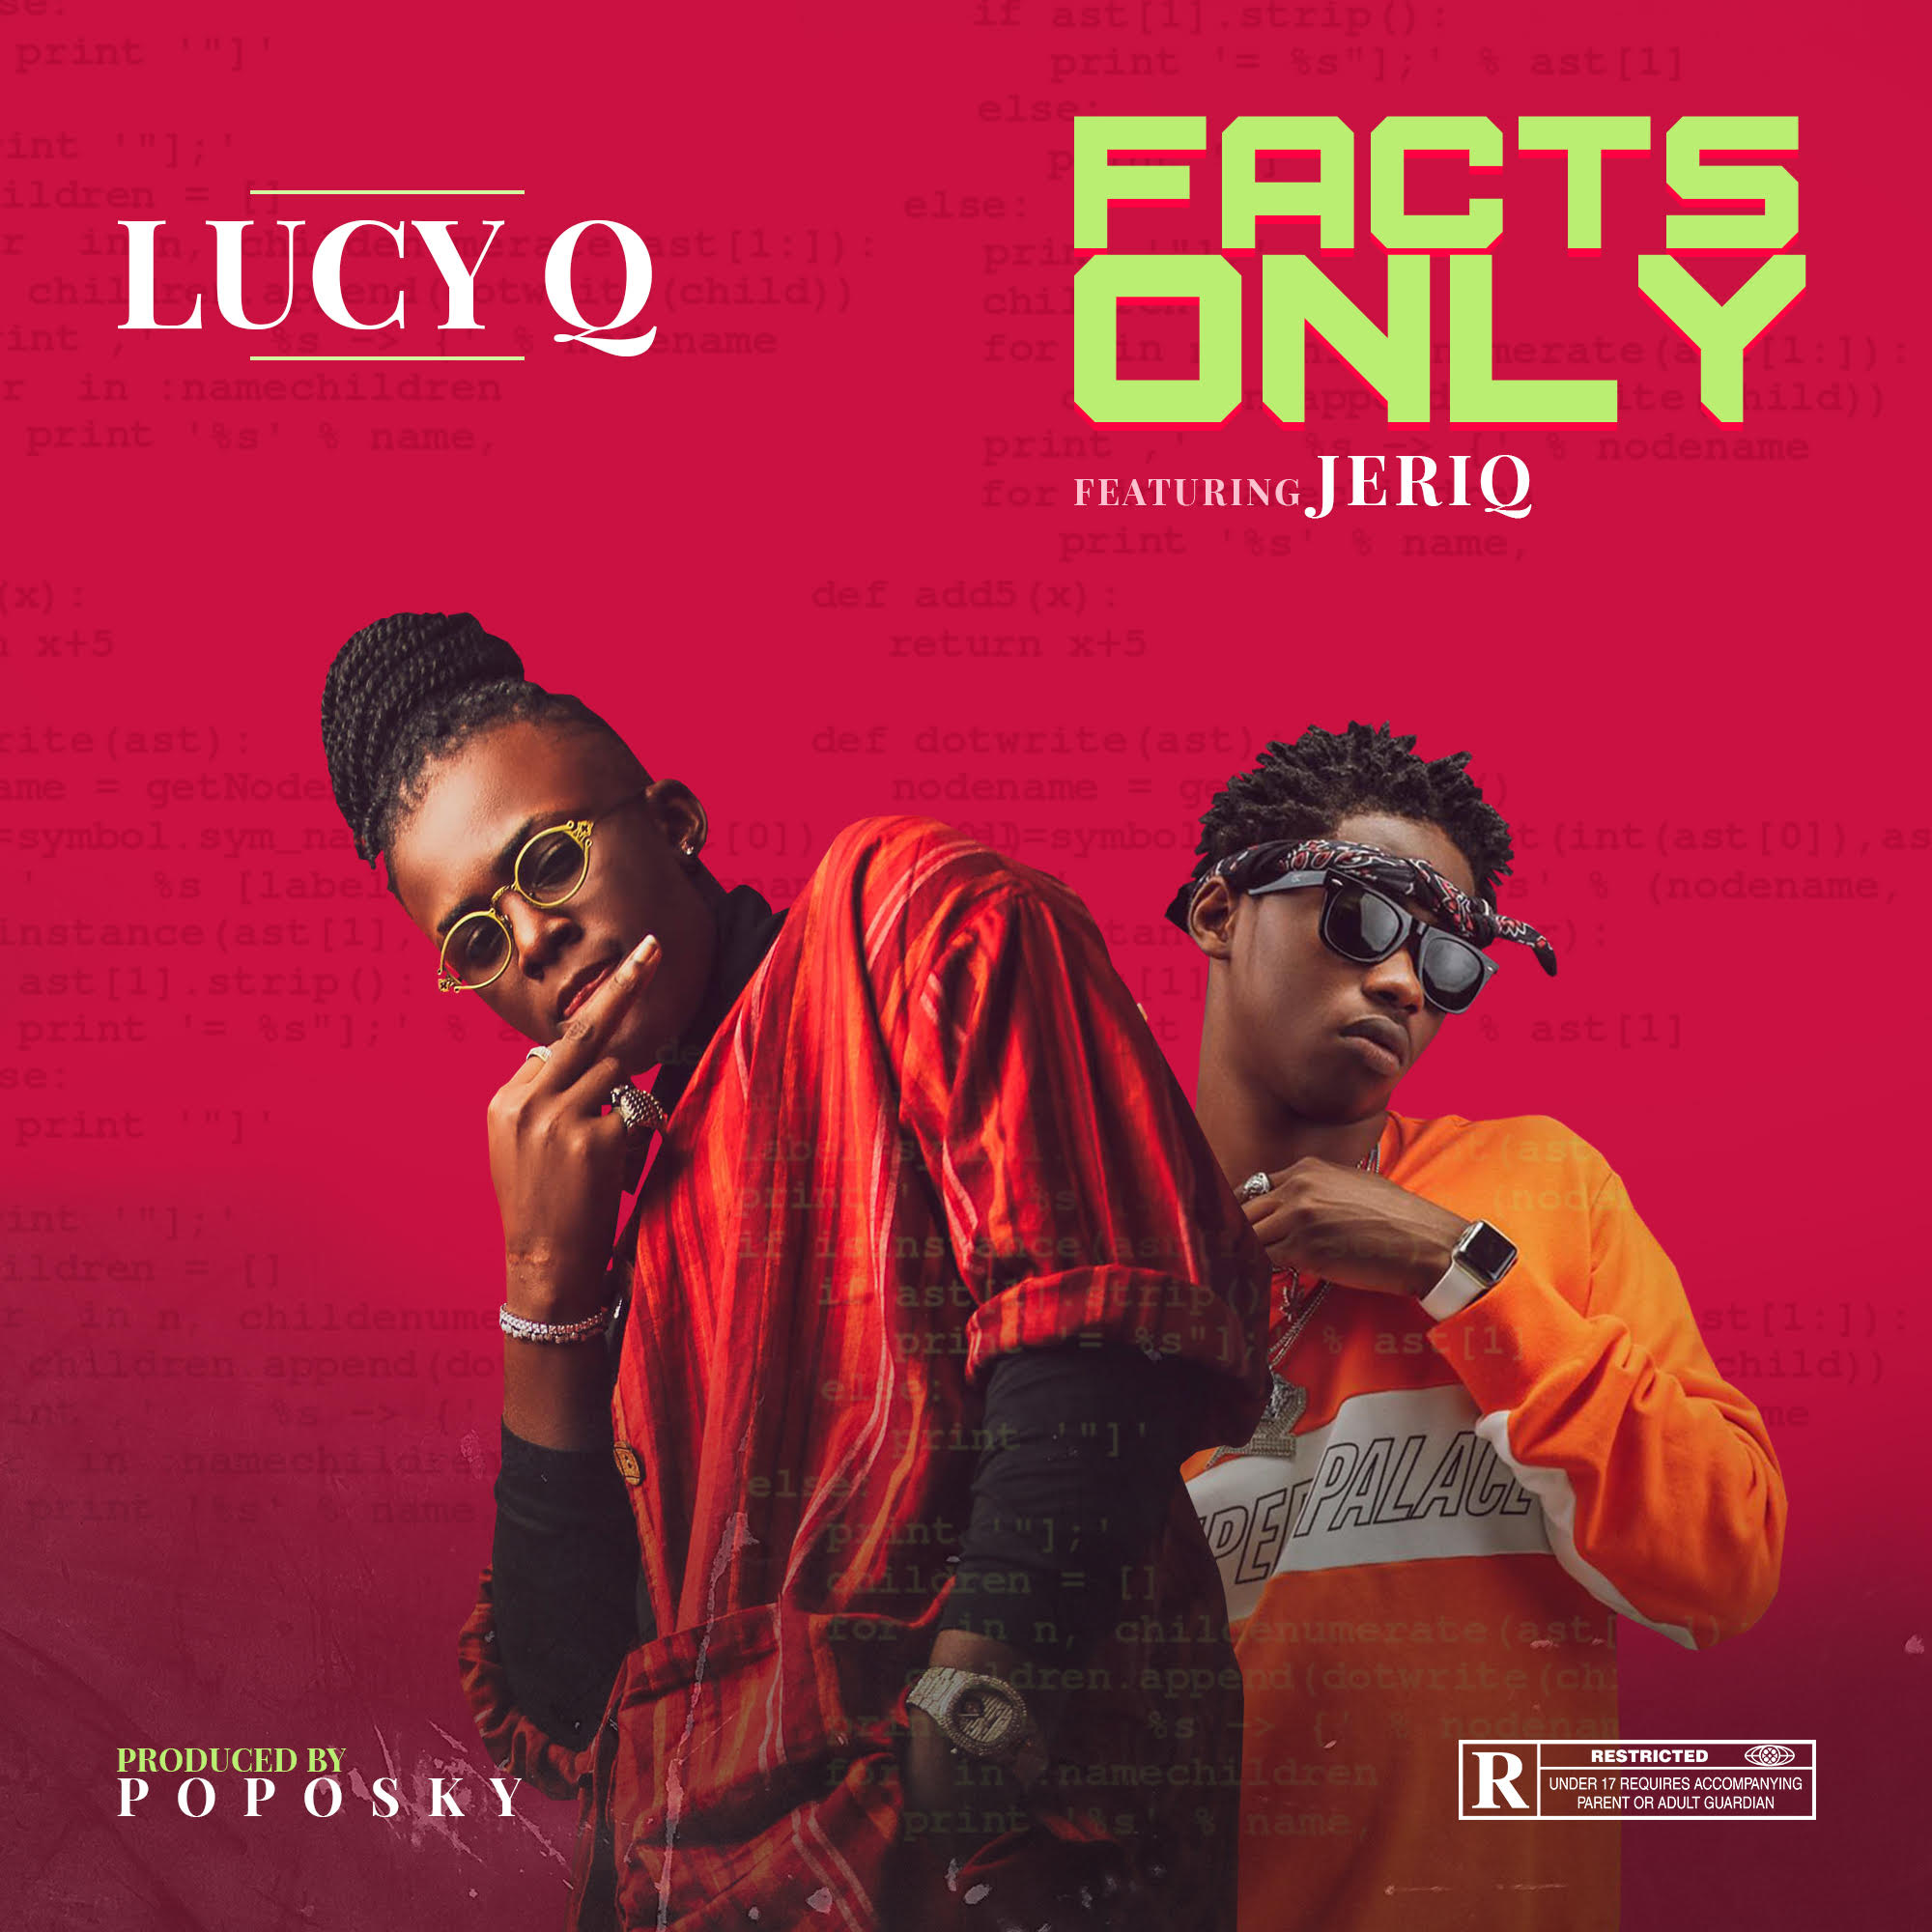 Lucy Q - Facts Only ft Jeriq download mp3